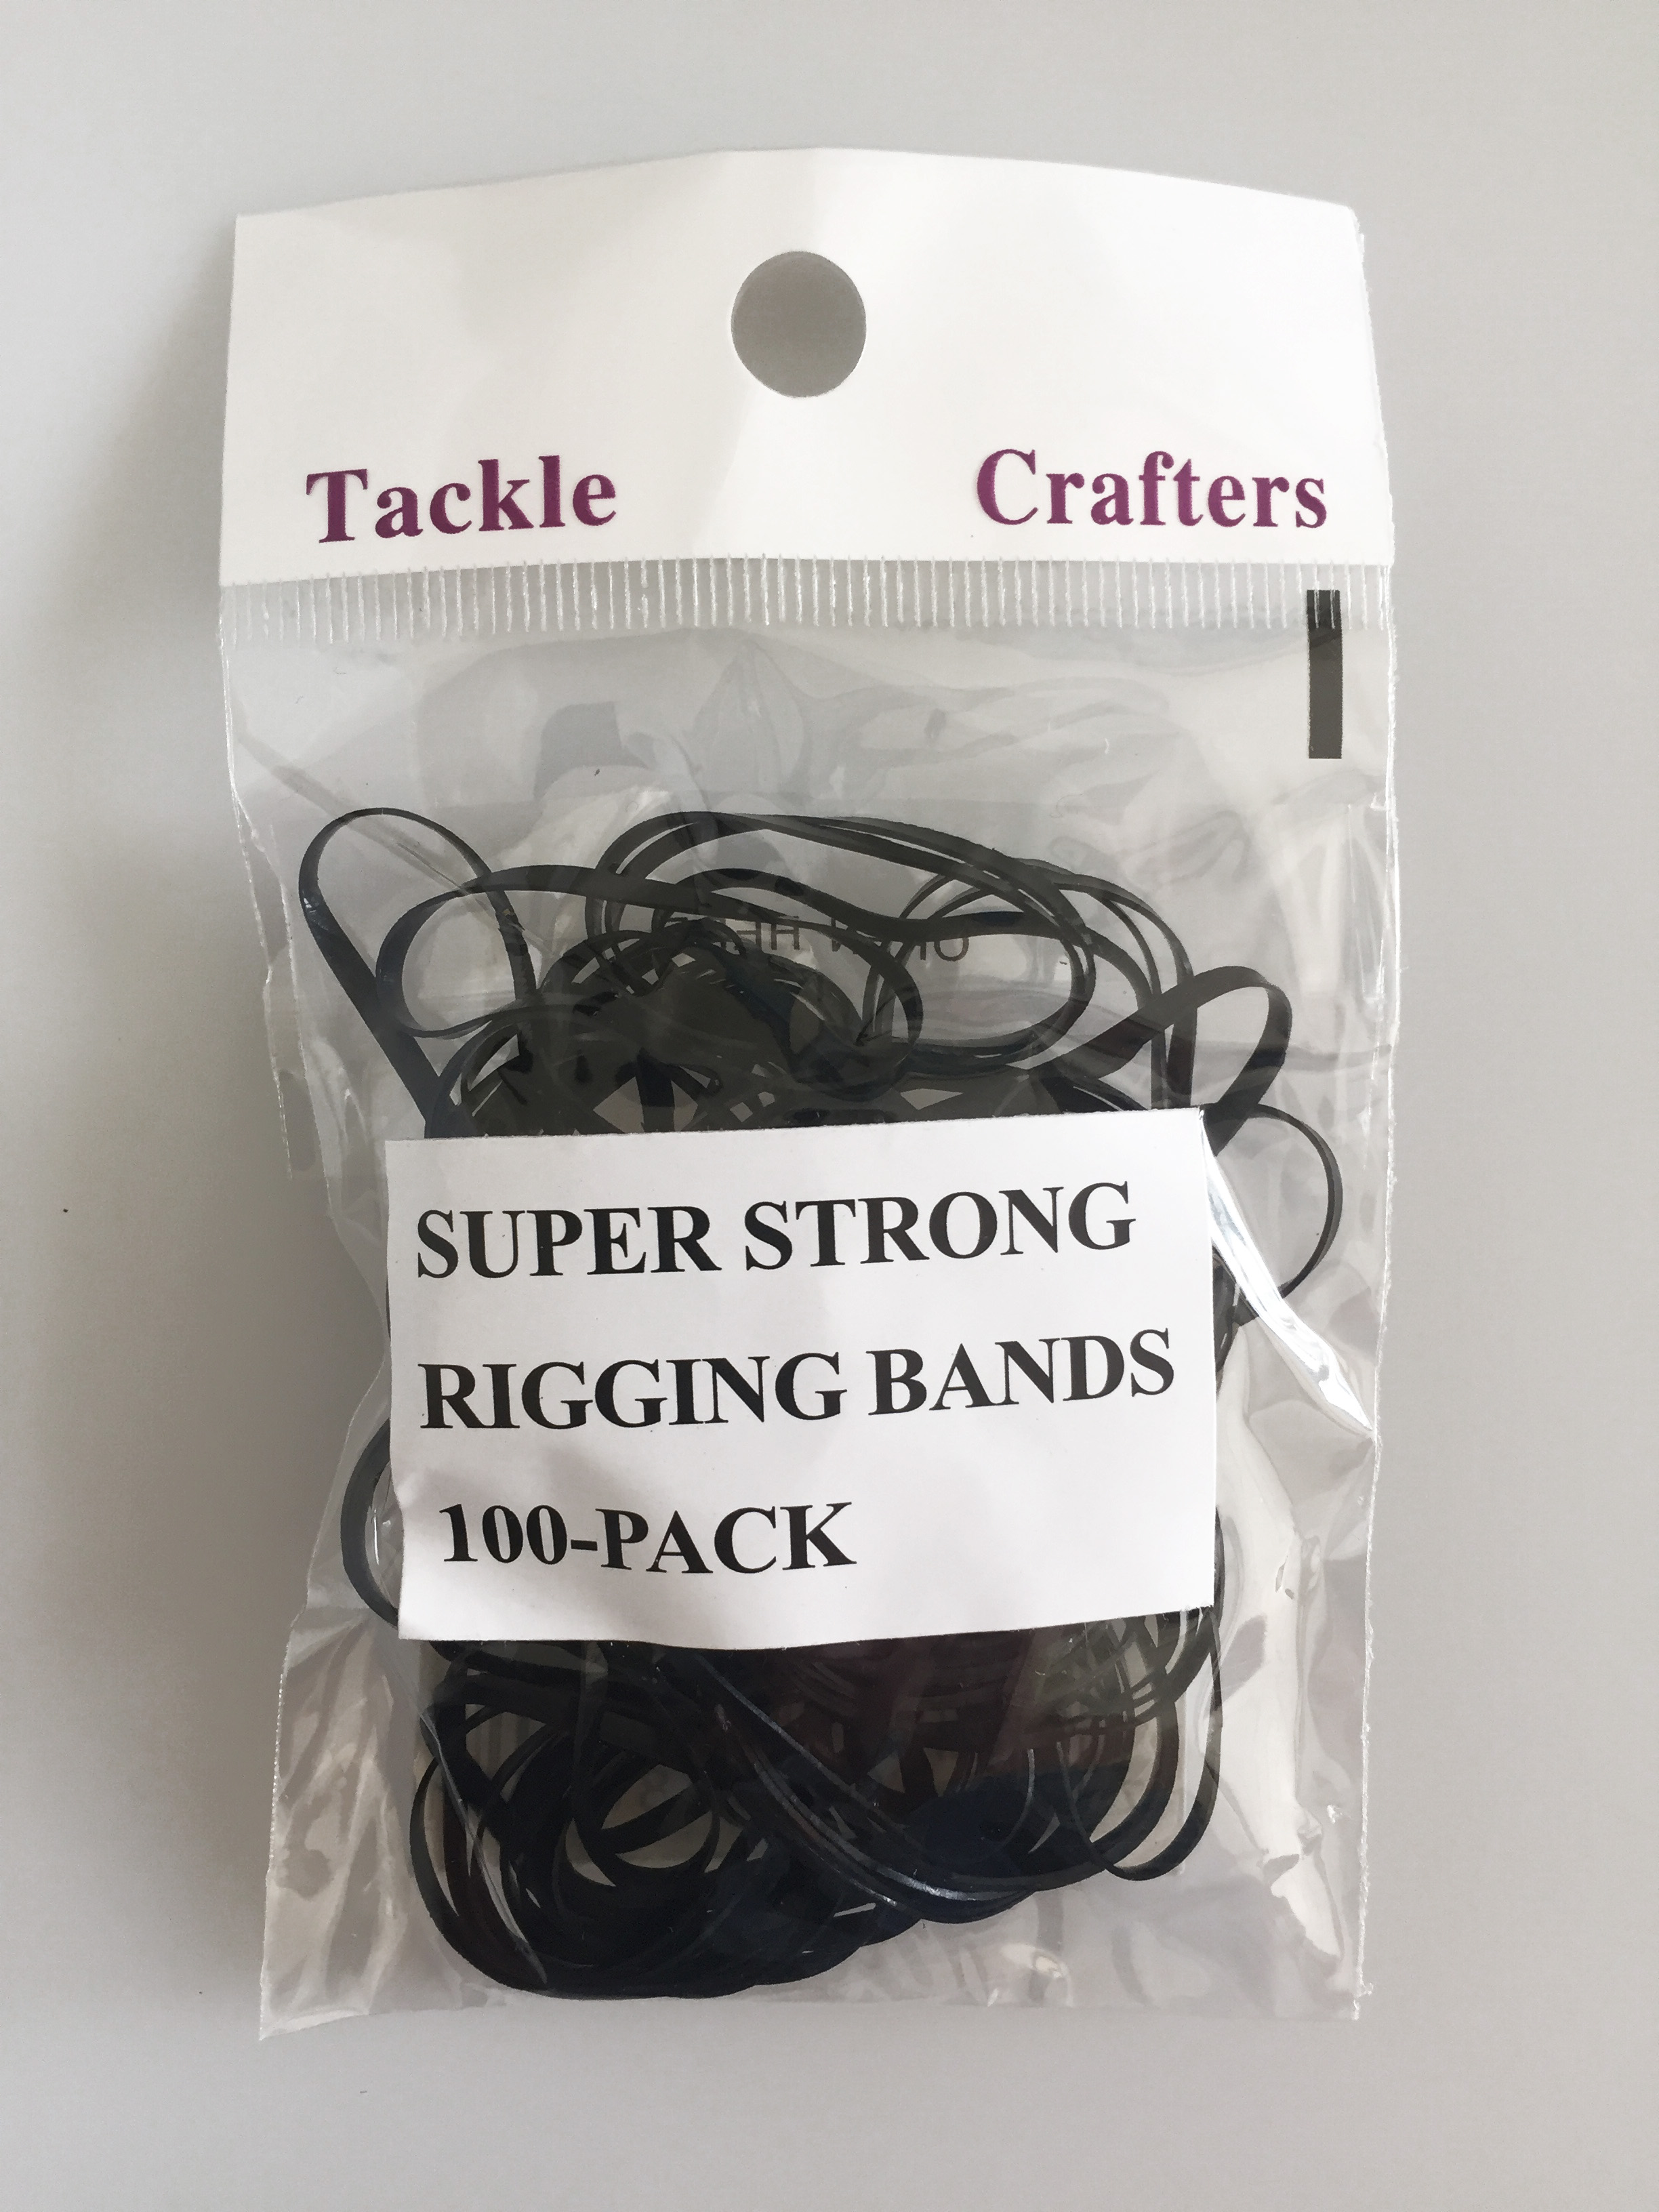 Rigging Bands 100 Pack at the Tackle Store - best online tackle shop